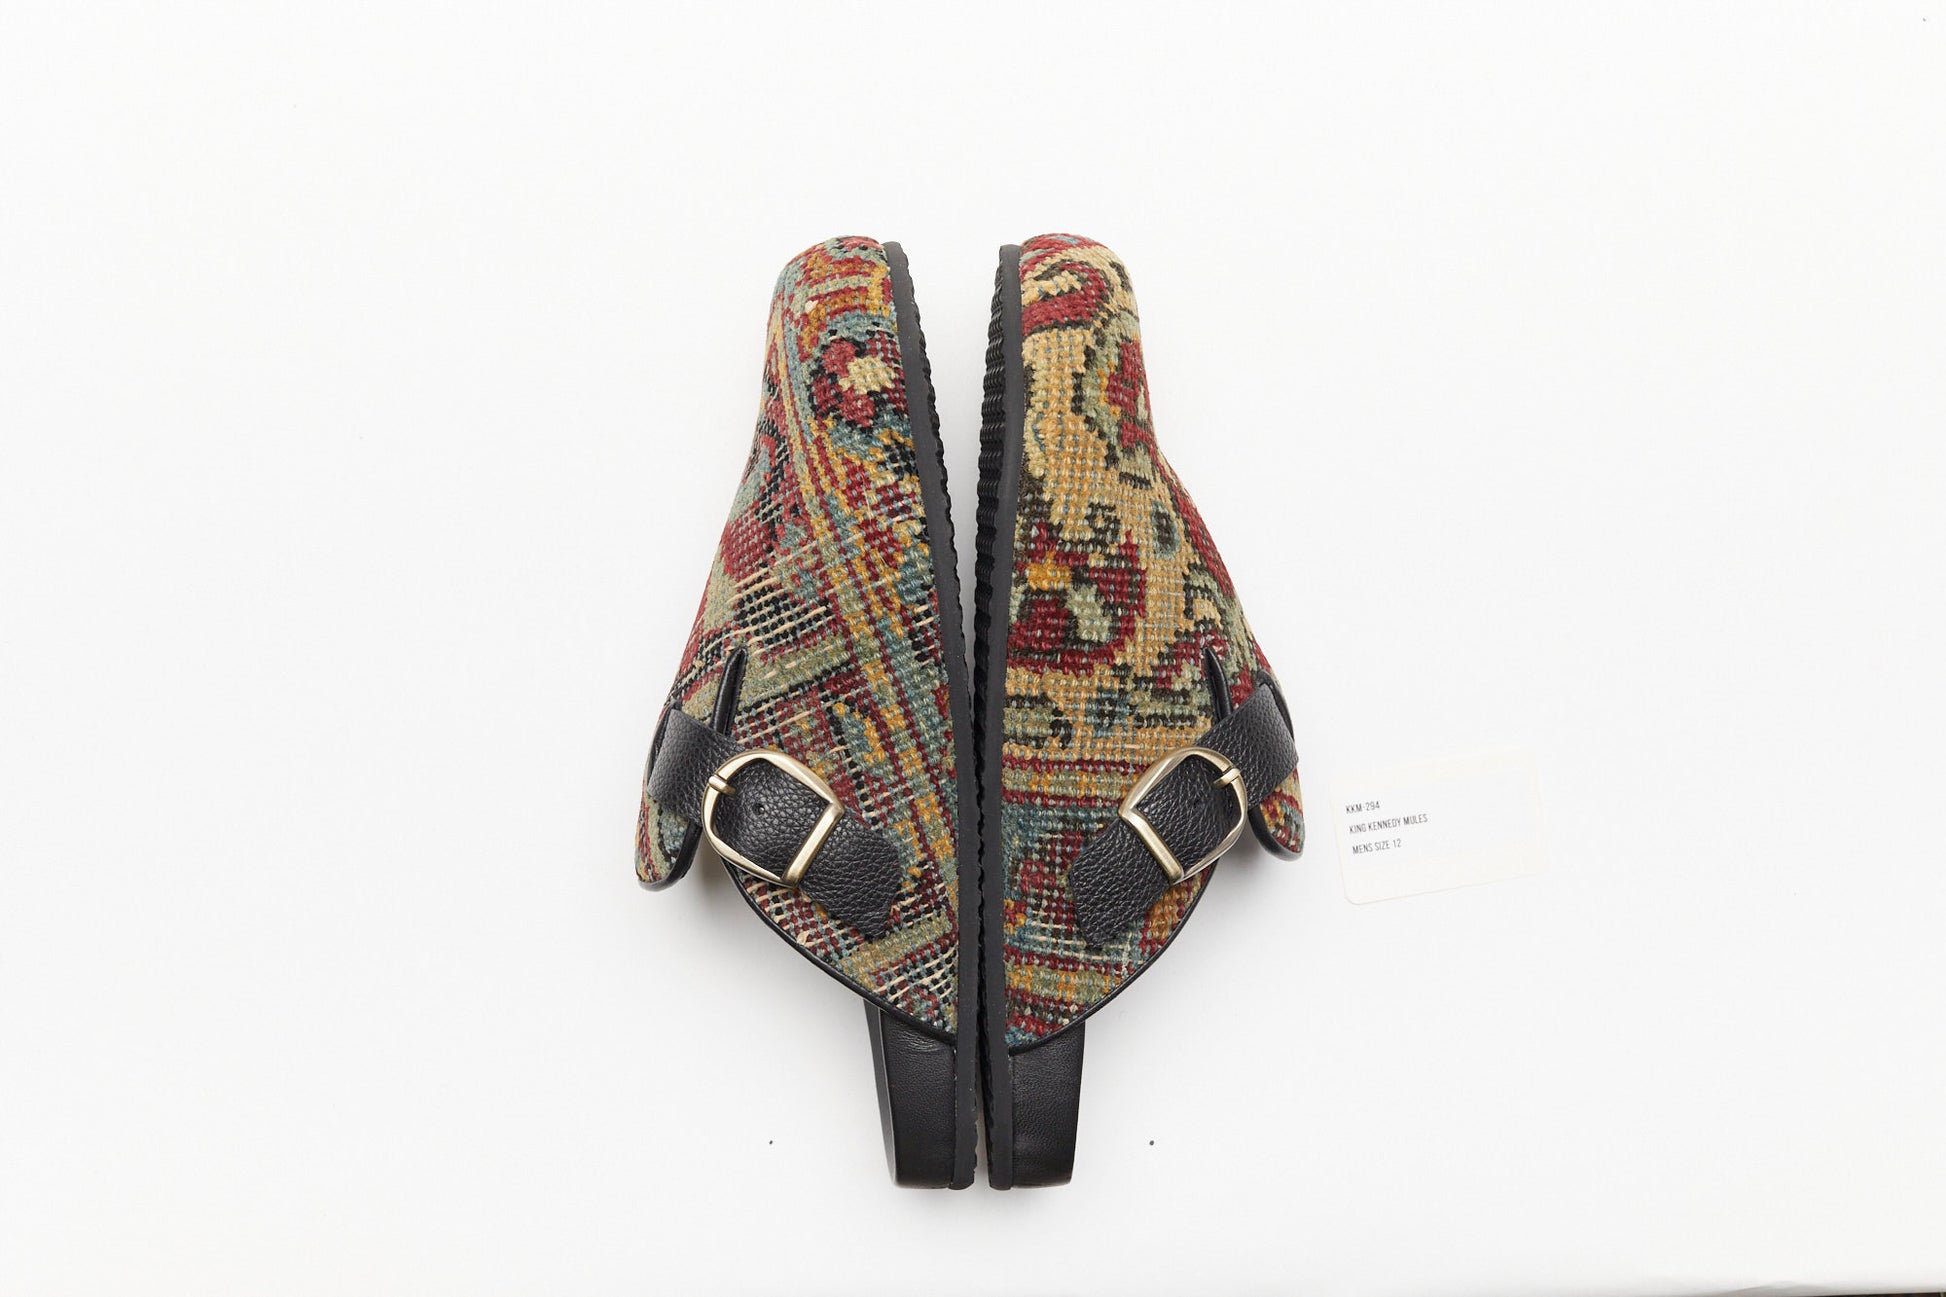 Buckle side view of rug mules.  King Kennedy Rug Mules are one-of-a-kind and made of 100 year old antique Persian rug fragments with soft lambskin footbed and comfortable rubber sole. This pair is made of an antique Persian rug with gold, red and faded blue patterns. 